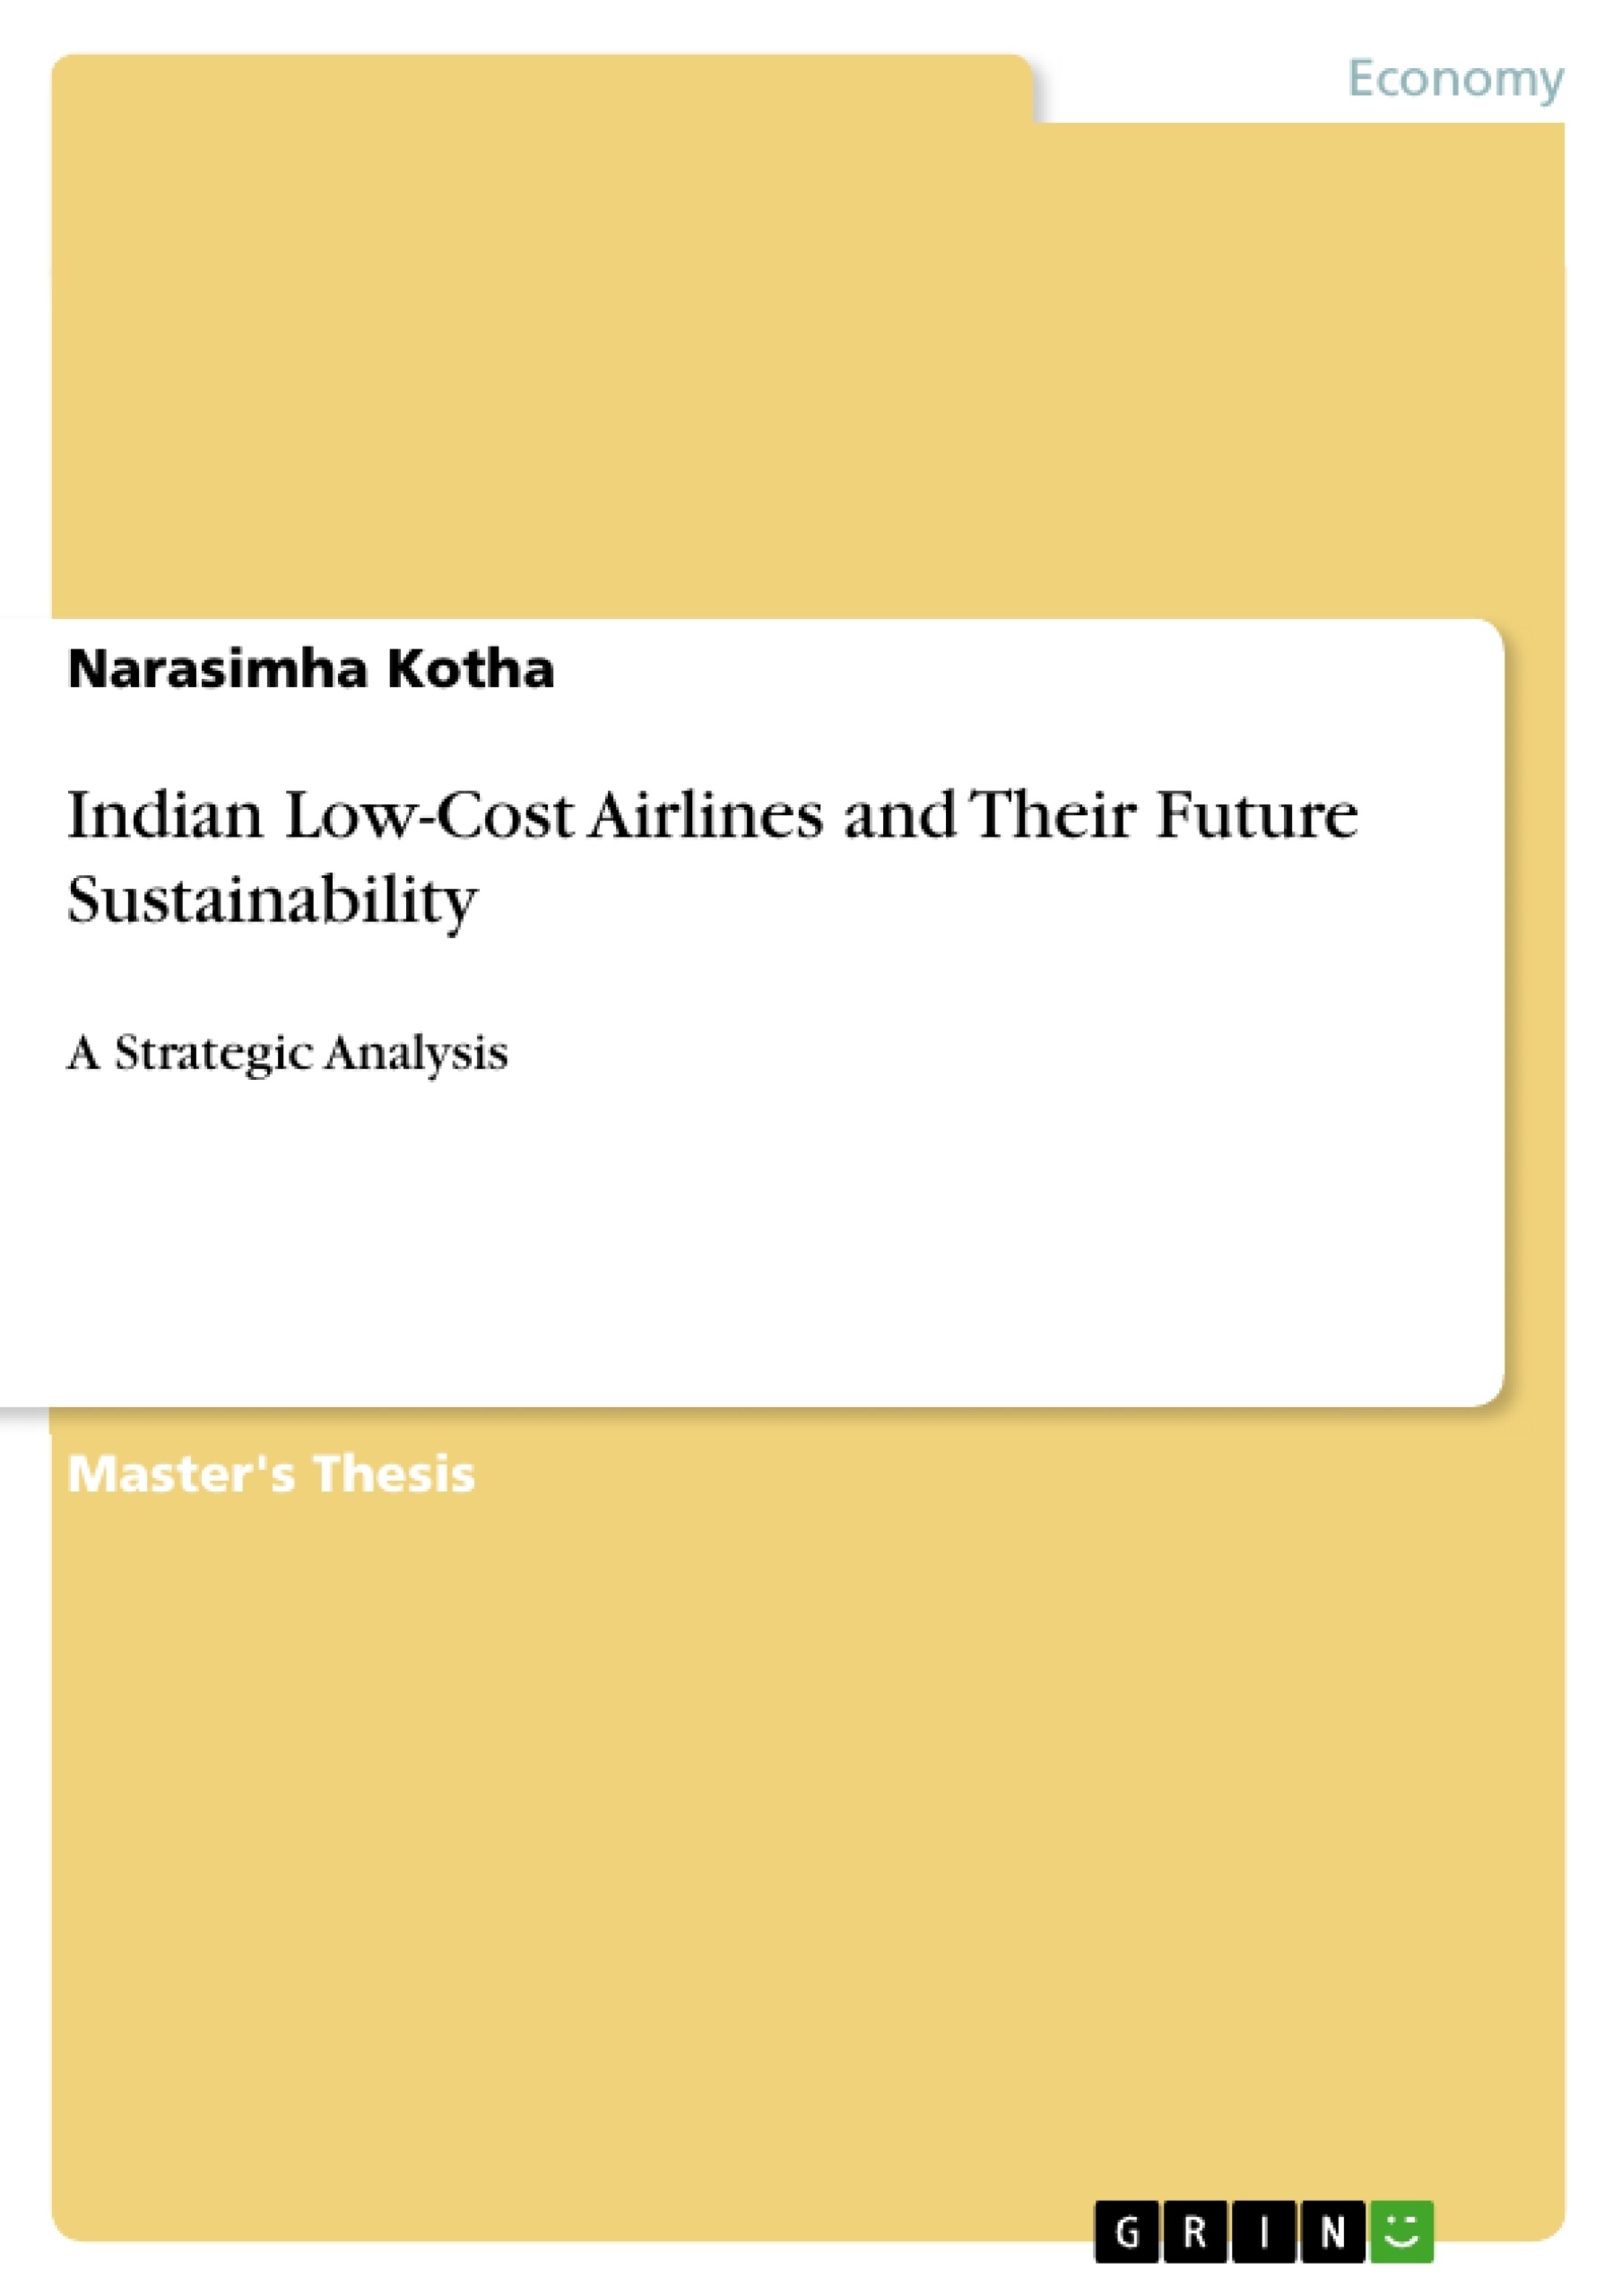 Title: Indian Low-Cost Airlines and Their Future Sustainability